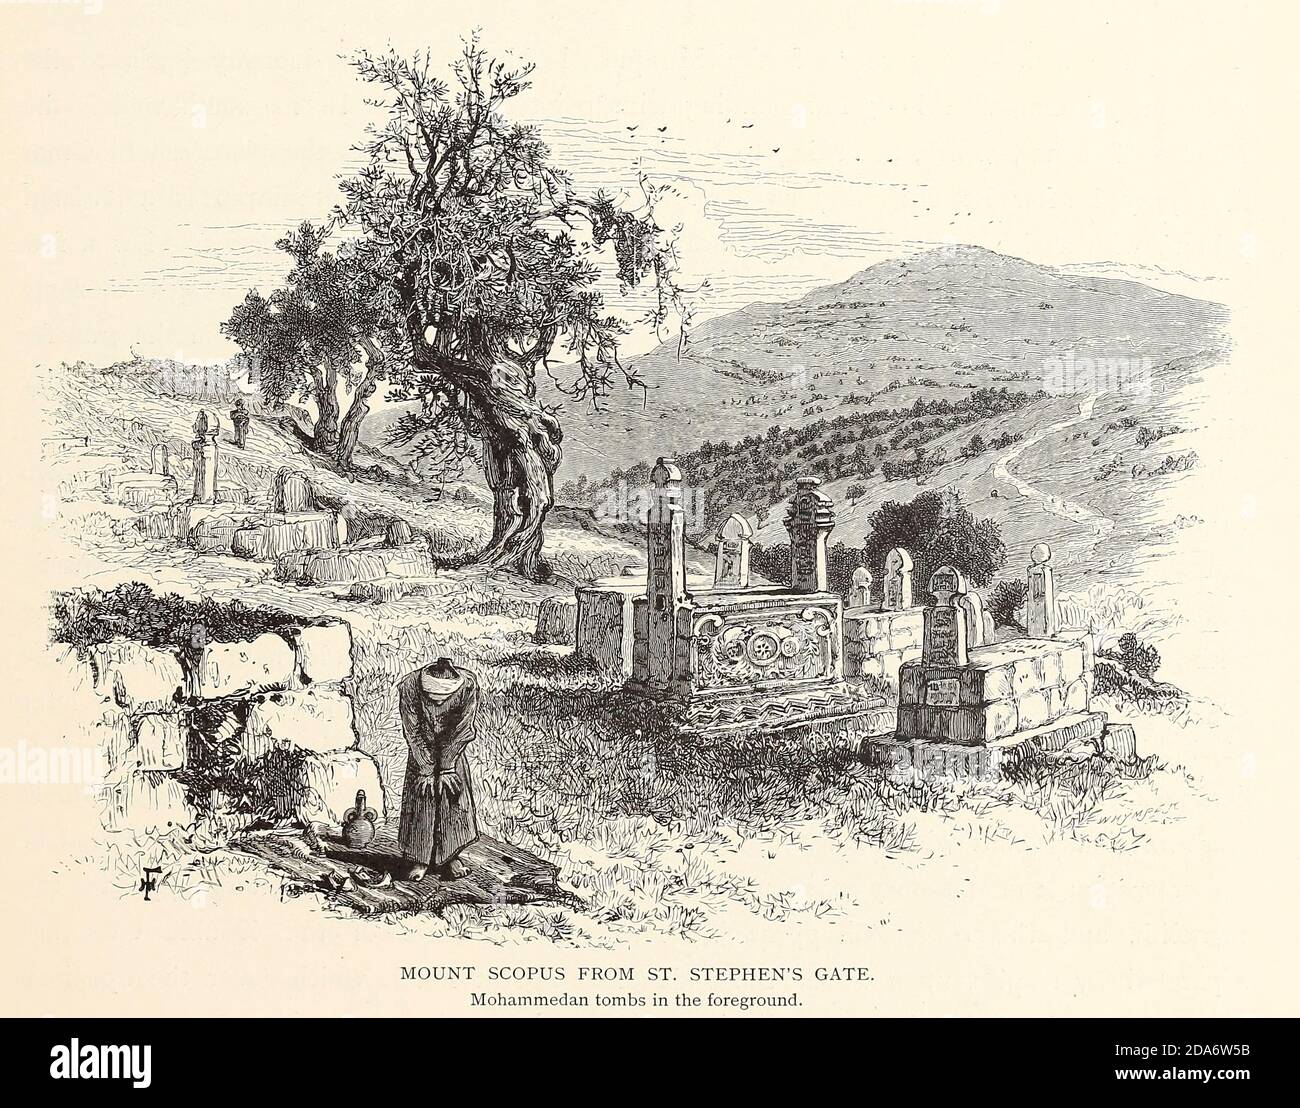 Mount Scoupus from St. Stephen's Gate, Jerusalem. from the book Picturesque Palestine, Sinai, and Egypt By  Colonel Wilson, Charles William, Sir, 1836-1905. Published in New York by D. Appleton and Company in 1881  with engravings in steel and wood from original Drawings by Harry Fenn and J. D. Woodward Volume 1 Stock Photo